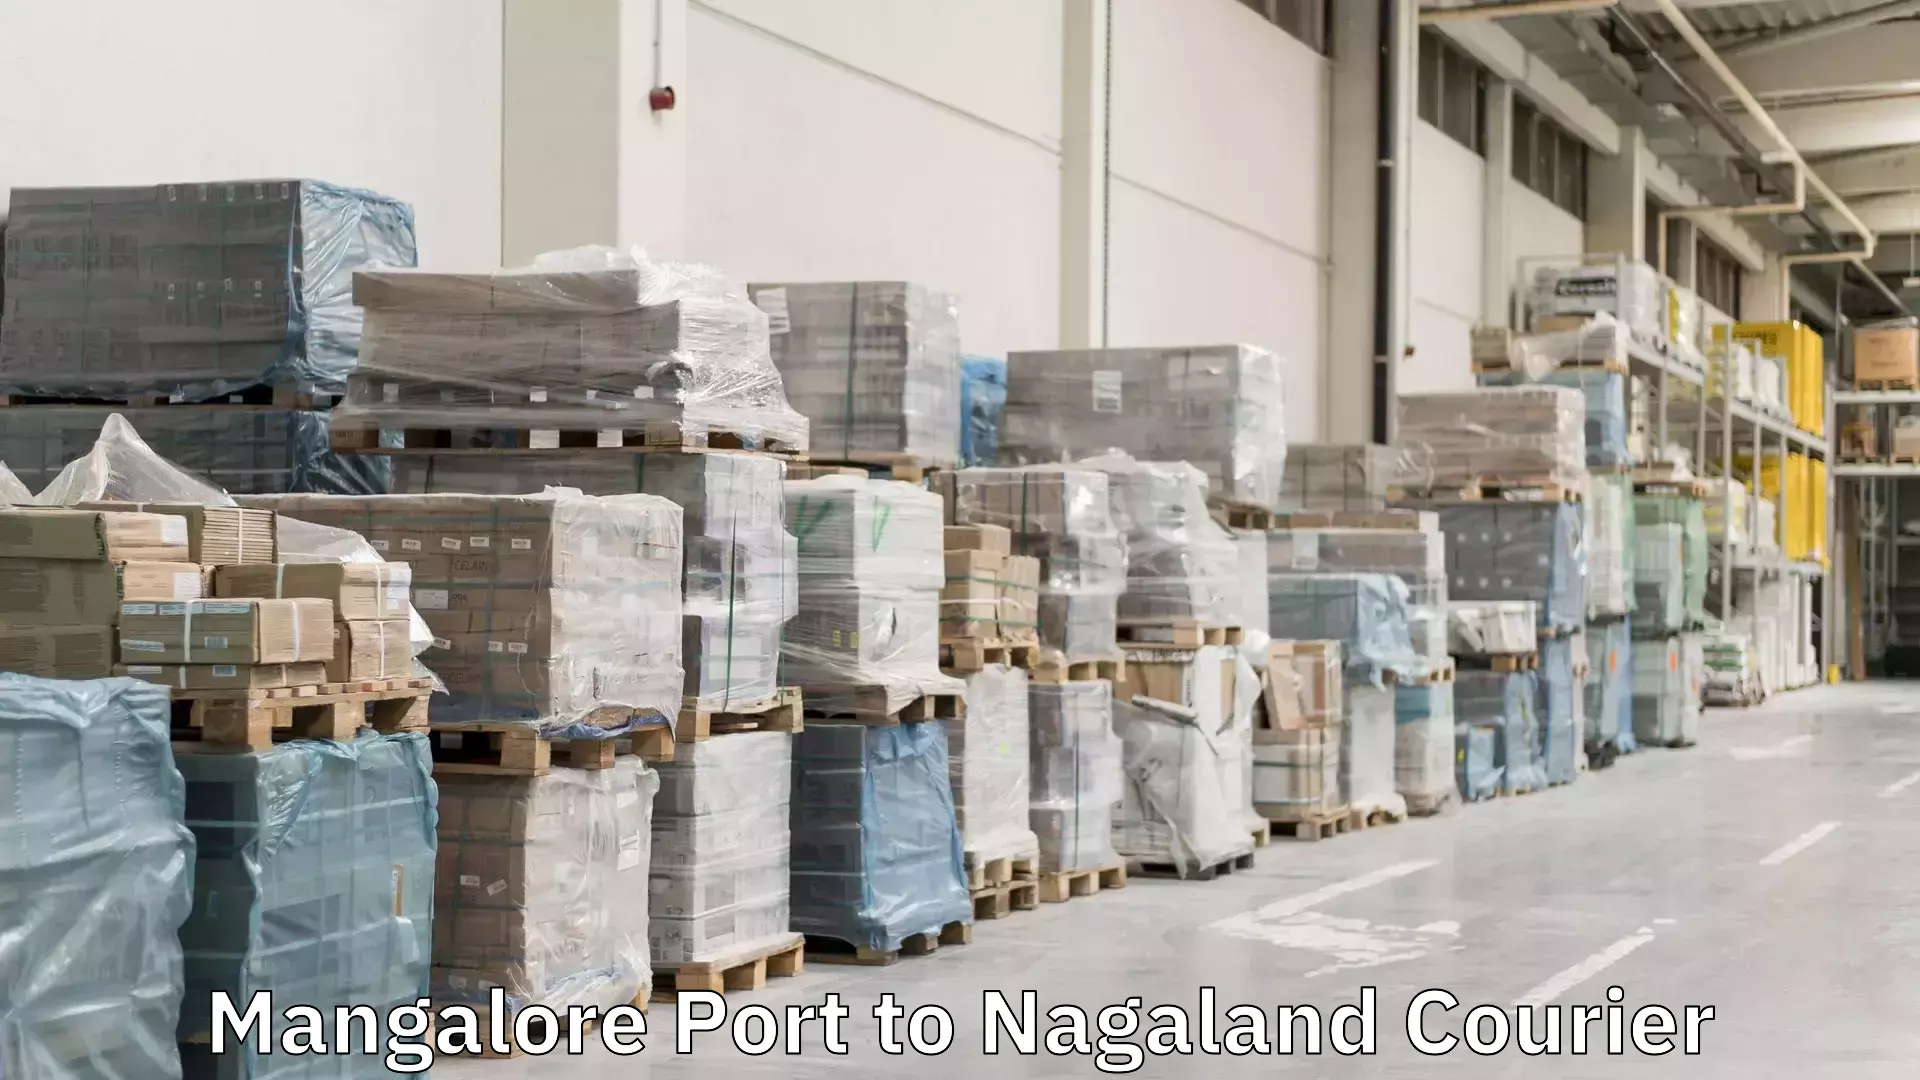 Efficient shipping operations in Mangalore Port to Nagaland